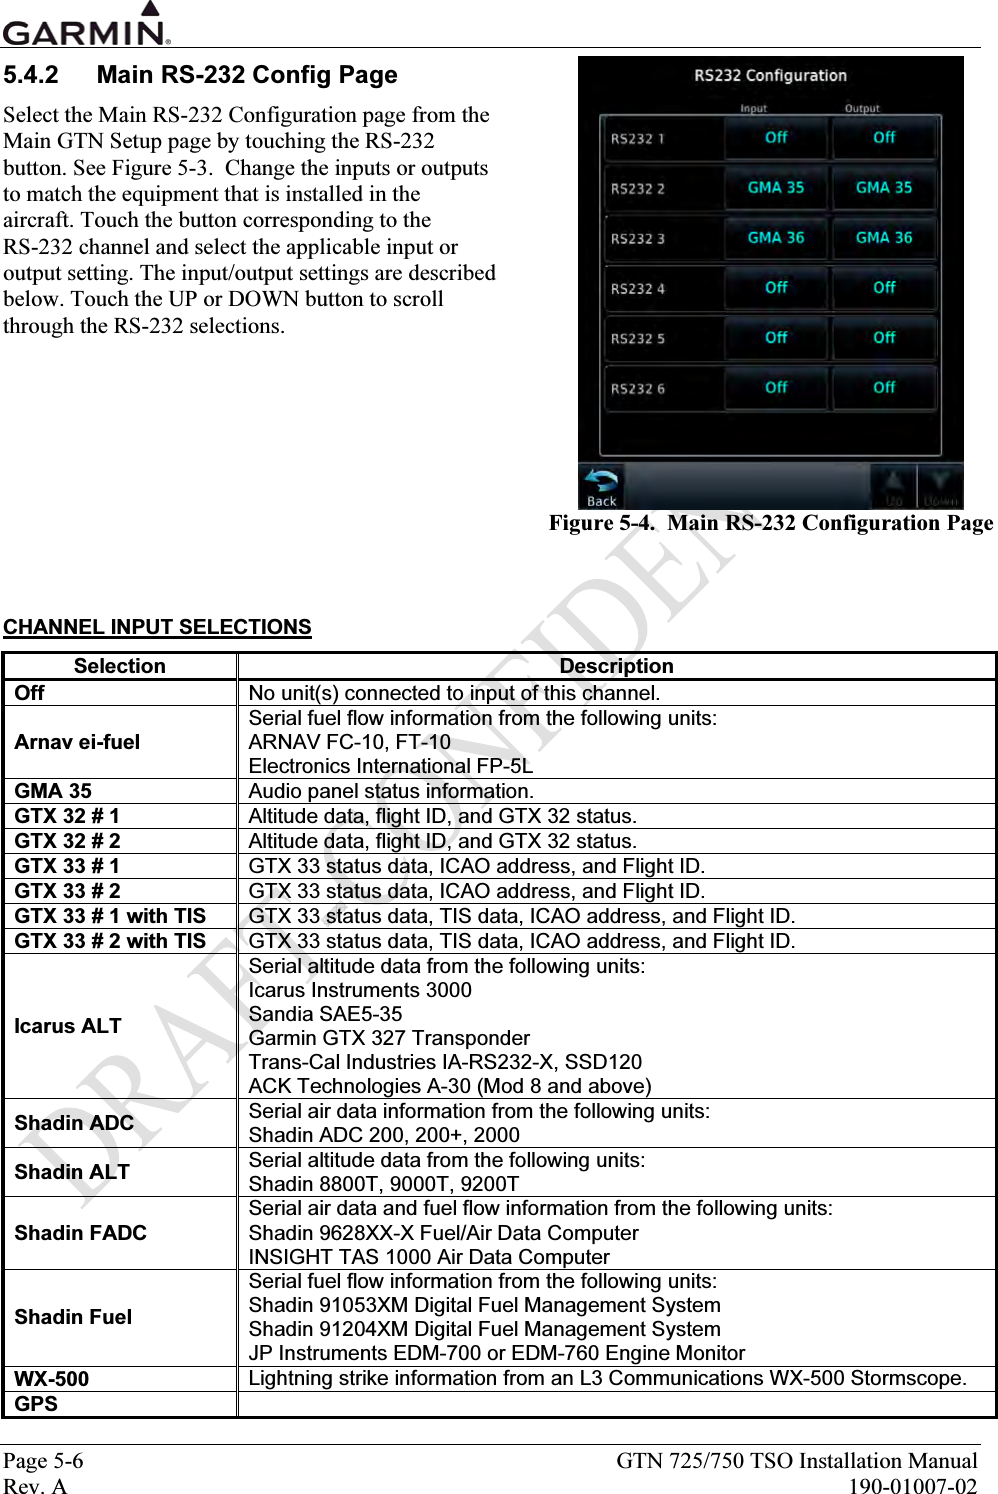  Page 5-6  GTN 725/750 TSO Installation Manual Rev. A  190-01007-02 5.4.2  Main RS-232 Config Page Select the Main RS-232 Configuration page from the Main GTN Setup page by touching the RS-232 button. See Figure 5-3.  Change the inputs or outputs to match the equipment that is installed in the aircraft. Touch the button corresponding to the  RS-232 channel and select the applicable input or output setting. The input/output settings are described below. Touch the UP or DOWN button to scroll through the RS-232 selections.           CHANNEL INPUT SELECTIONS Selection Description Off  No unit(s) connected to input of this channel. Arnav ei-fuel Serial fuel flow information from the following units: ARNAV FC-10, FT-10 Electronics International FP-5L GMA 35  Audio panel status information. GTX 32 # 1  Altitude data, flight ID, and GTX 32 status. GTX 32 # 2  Altitude data, flight ID, and GTX 32 status. GTX 33 # 1  GTX 33 status data, ICAO address, and Flight ID. GTX 33 # 2  GTX 33 status data, ICAO address, and Flight ID. GTX 33 # 1 with TIS  GTX 33 status data, TIS data, ICAO address, and Flight ID. GTX 33 # 2 with TIS  GTX 33 status data, TIS data, ICAO address, and Flight ID. Icarus ALT Serial altitude data from the following units: Icarus Instruments 3000 Sandia SAE5-35 Garmin GTX 327 Transponder Trans-Cal Industries IA-RS232-X, SSD120 ACK Technologies A-30 (Mod 8 and above) Shadin ADC  Serial air data information from the following units: Shadin ADC 200, 200+, 2000 Shadin ALT  Serial altitude data from the following units: Shadin 8800T, 9000T, 9200T Shadin FADC Serial air data and fuel flow information from the following units: Shadin 9628XX-X Fuel/Air Data Computer INSIGHT TAS 1000 Air Data Computer Shadin Fuel Serial fuel flow information from the following units: Shadin 91053XM Digital Fuel Management System Shadin 91204XM Digital Fuel Management System JP Instruments EDM-700 or EDM-760 Engine Monitor WX-500  Lightning strike information from an L3 Communications WX-500 Stormscope. GPS     Figure 5-4.  Main RS-232 Configuration Page 